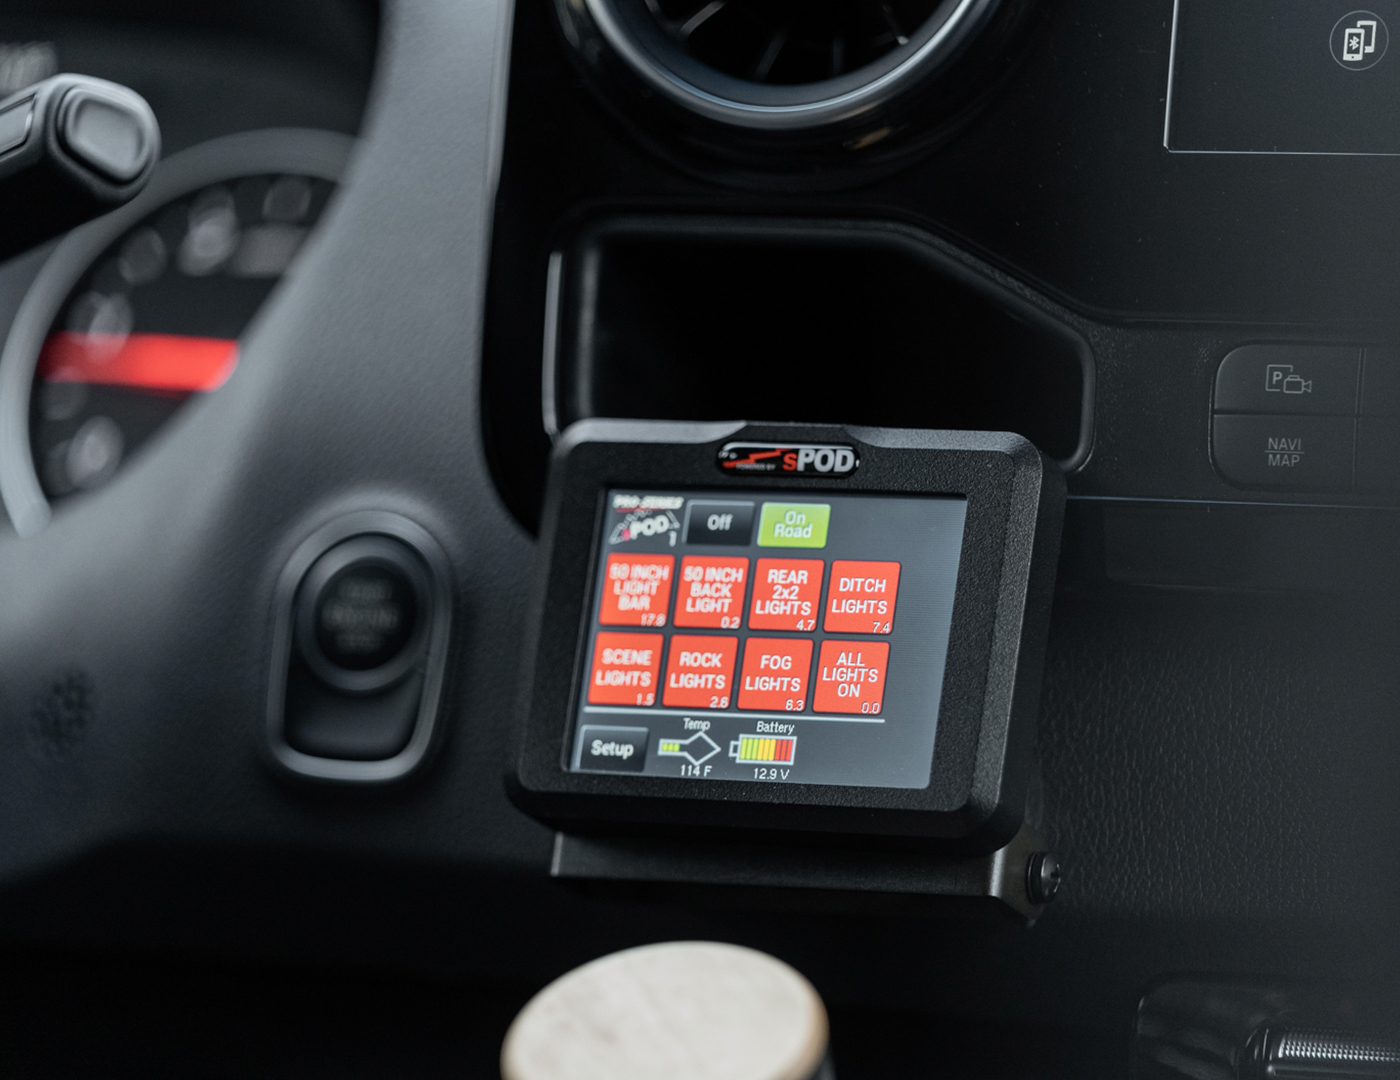 SPOD system navigation touch screen next to driver steering wheel